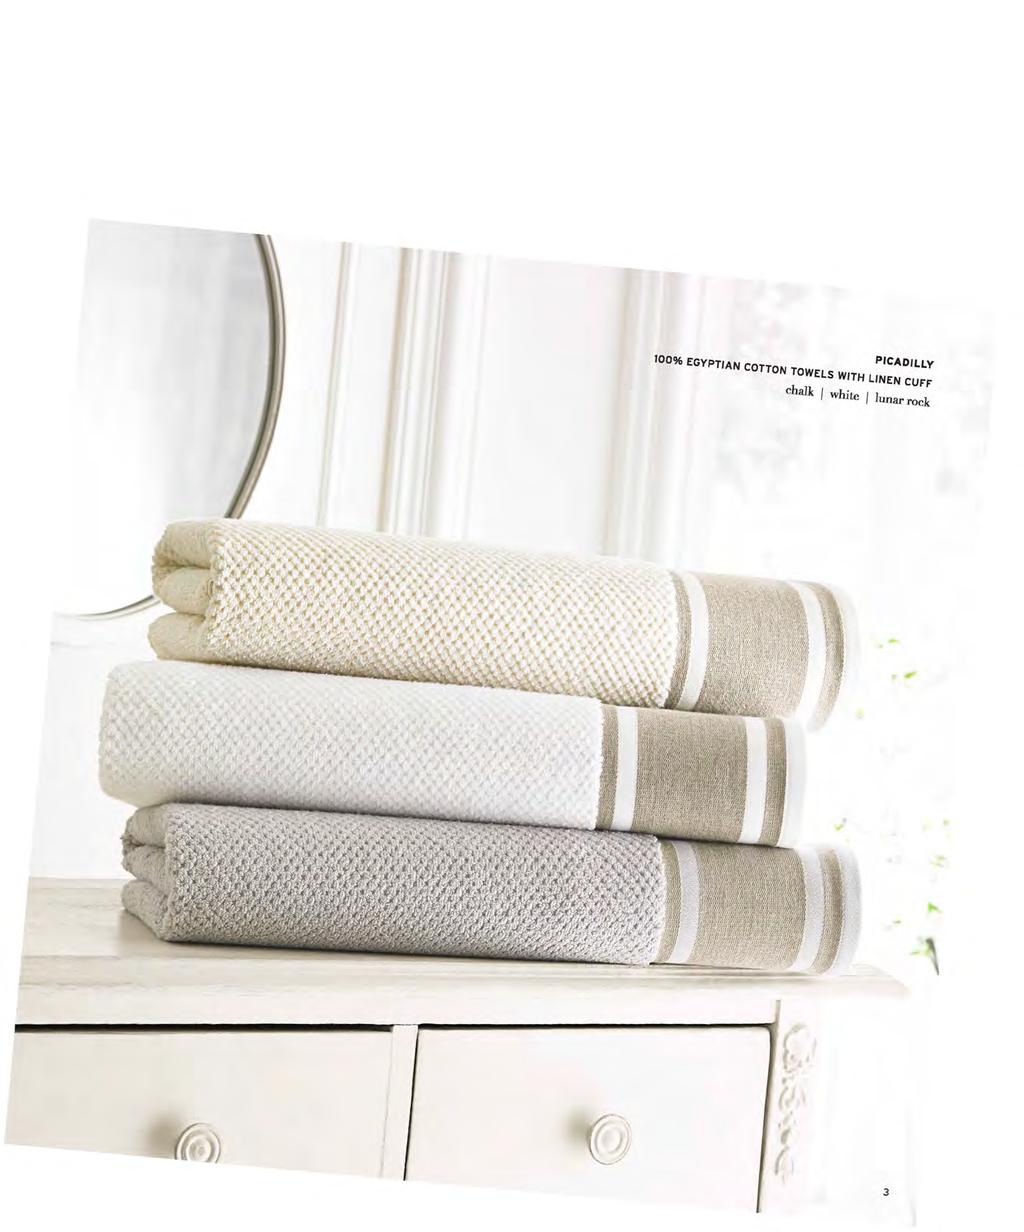 PICADILLY 100% EGYPTIAN COTTON TOWELS